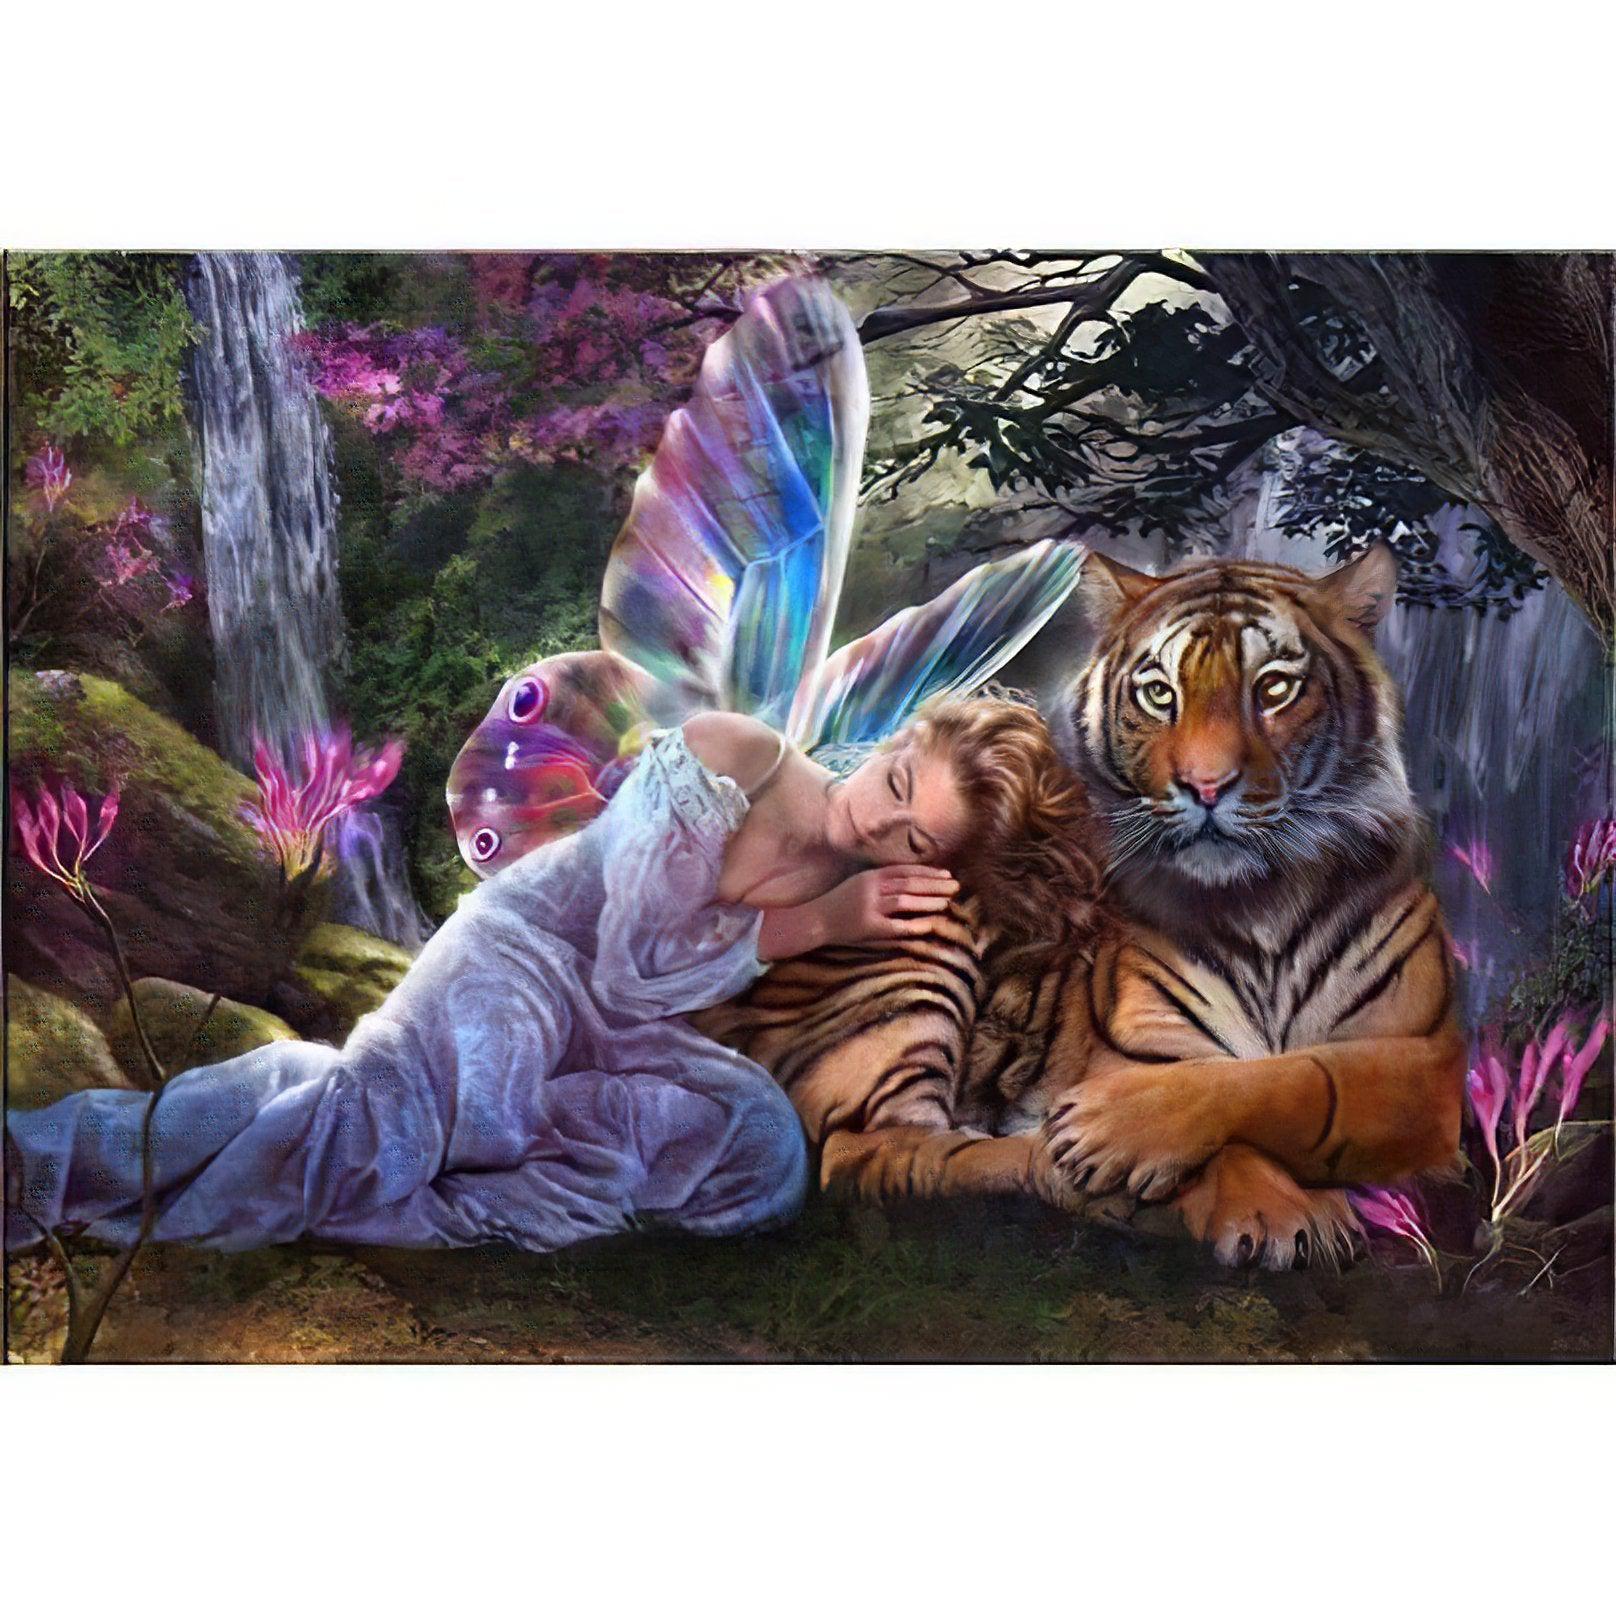 Sleeping Fairy And Tiger